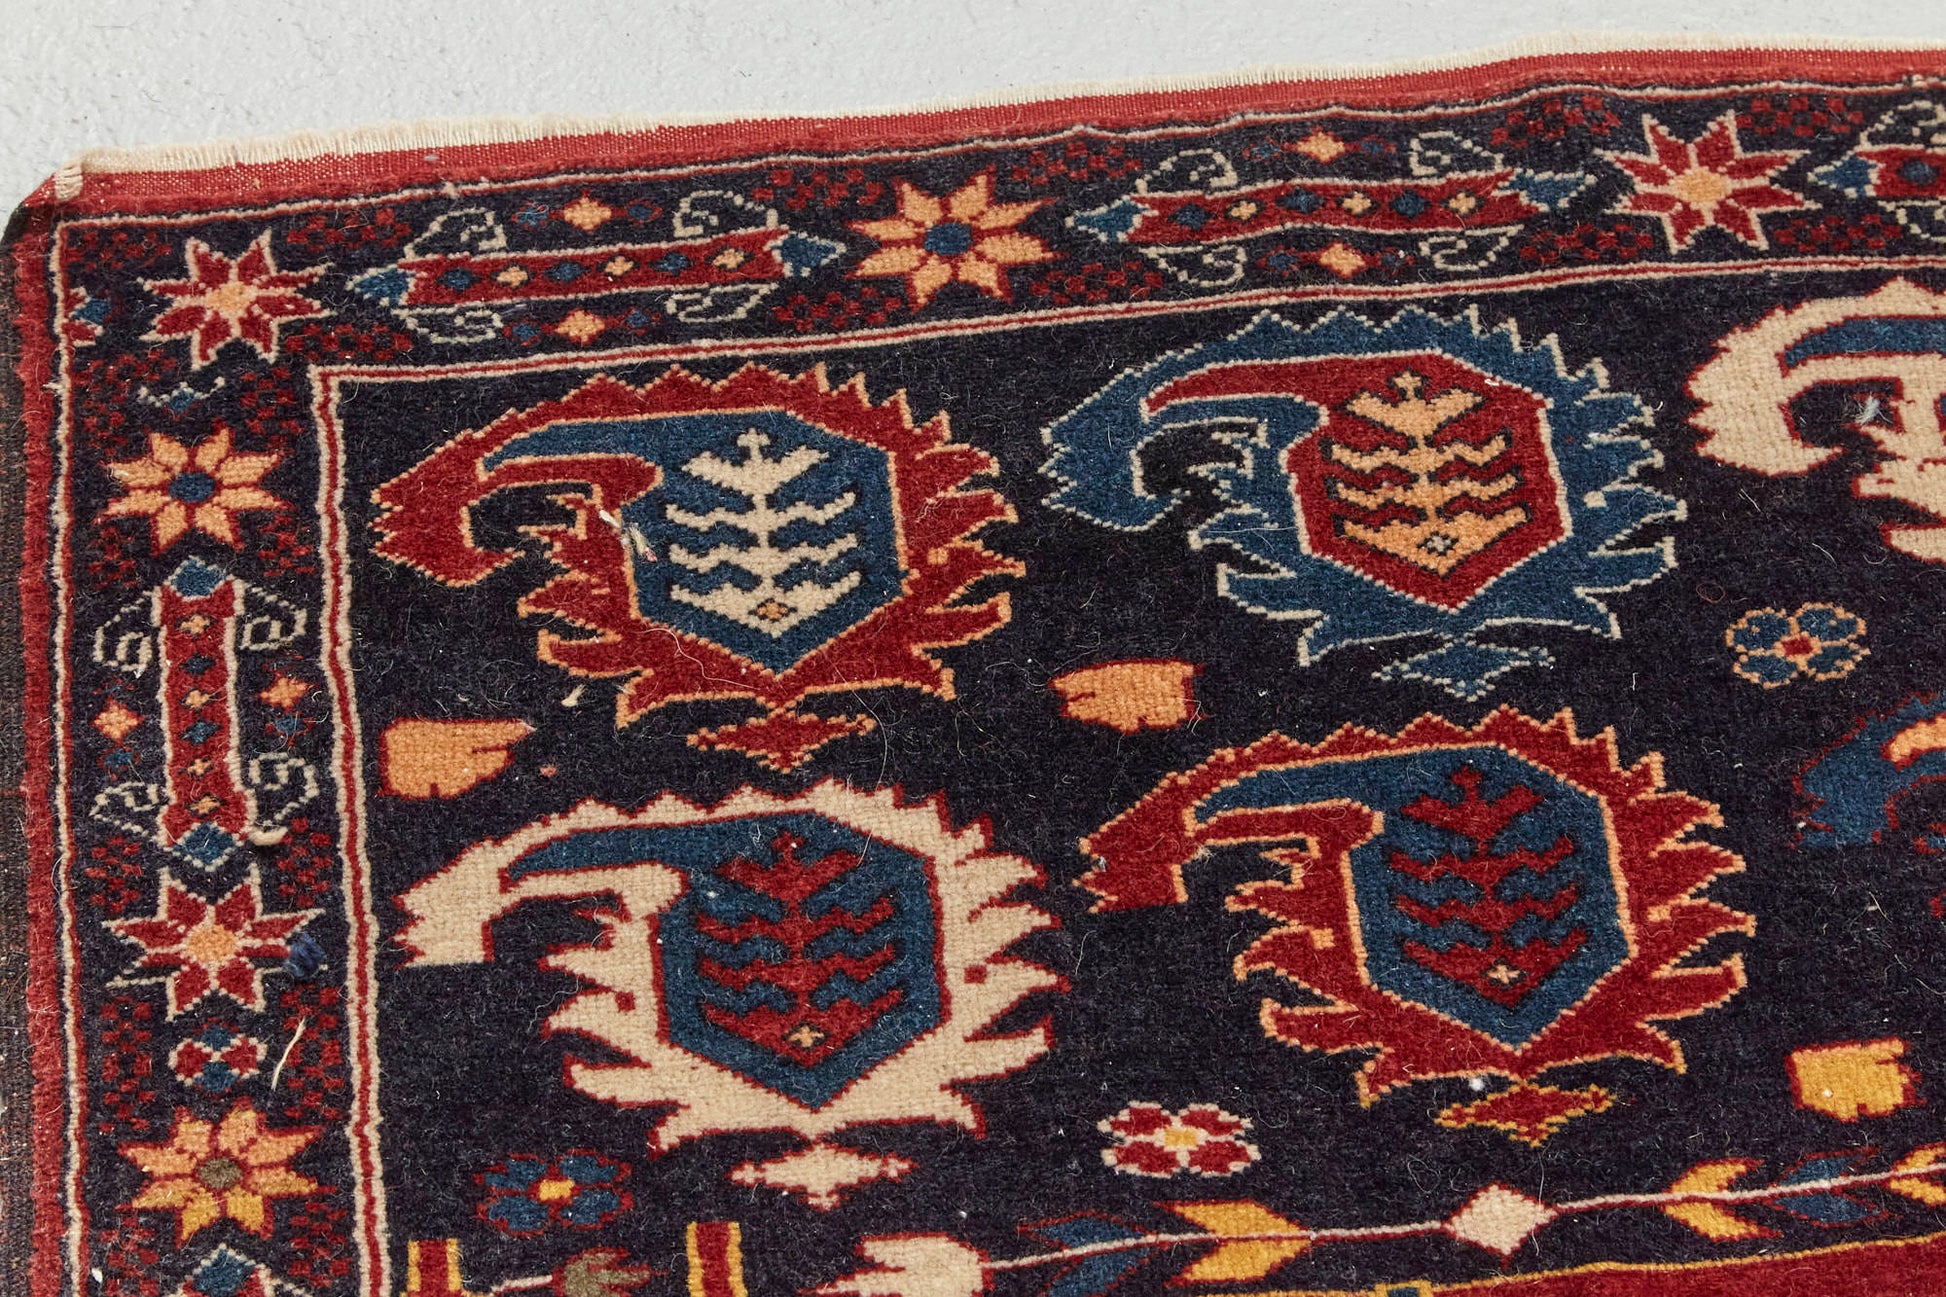 Corner detail of antique Bidjar Persian Rug Sampler, hand woven with dark blue base and red, cream, gold and lighter blue shapes, beautiful piece in excellent condition for a study, bedroom or foyer rug - Available from King Kennedy Rugs Los Angeles